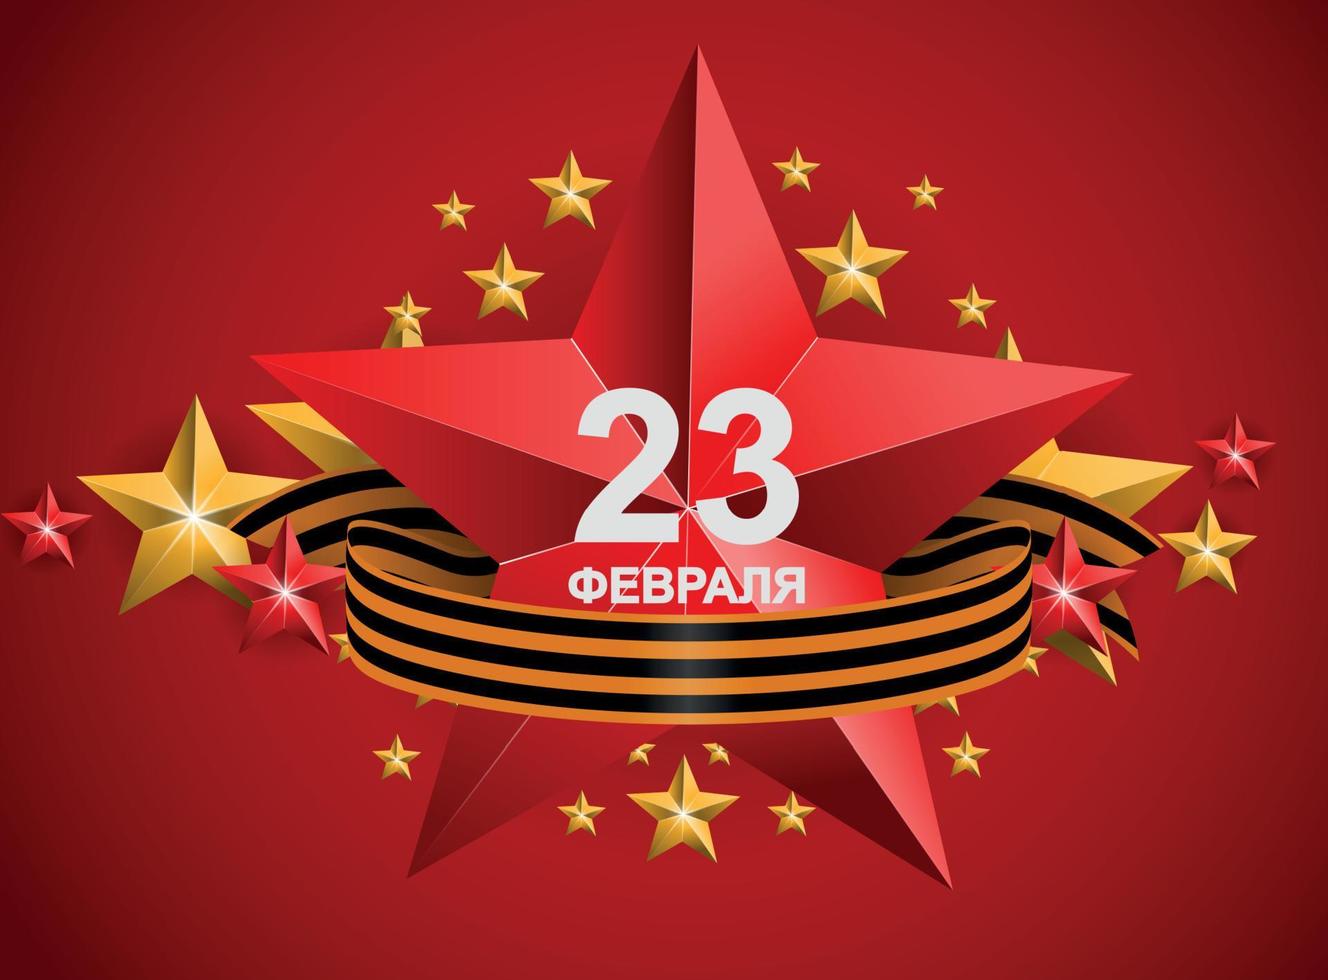 Abstract Background with Russian translation of the inscription 23 February.Vector Illustration vector